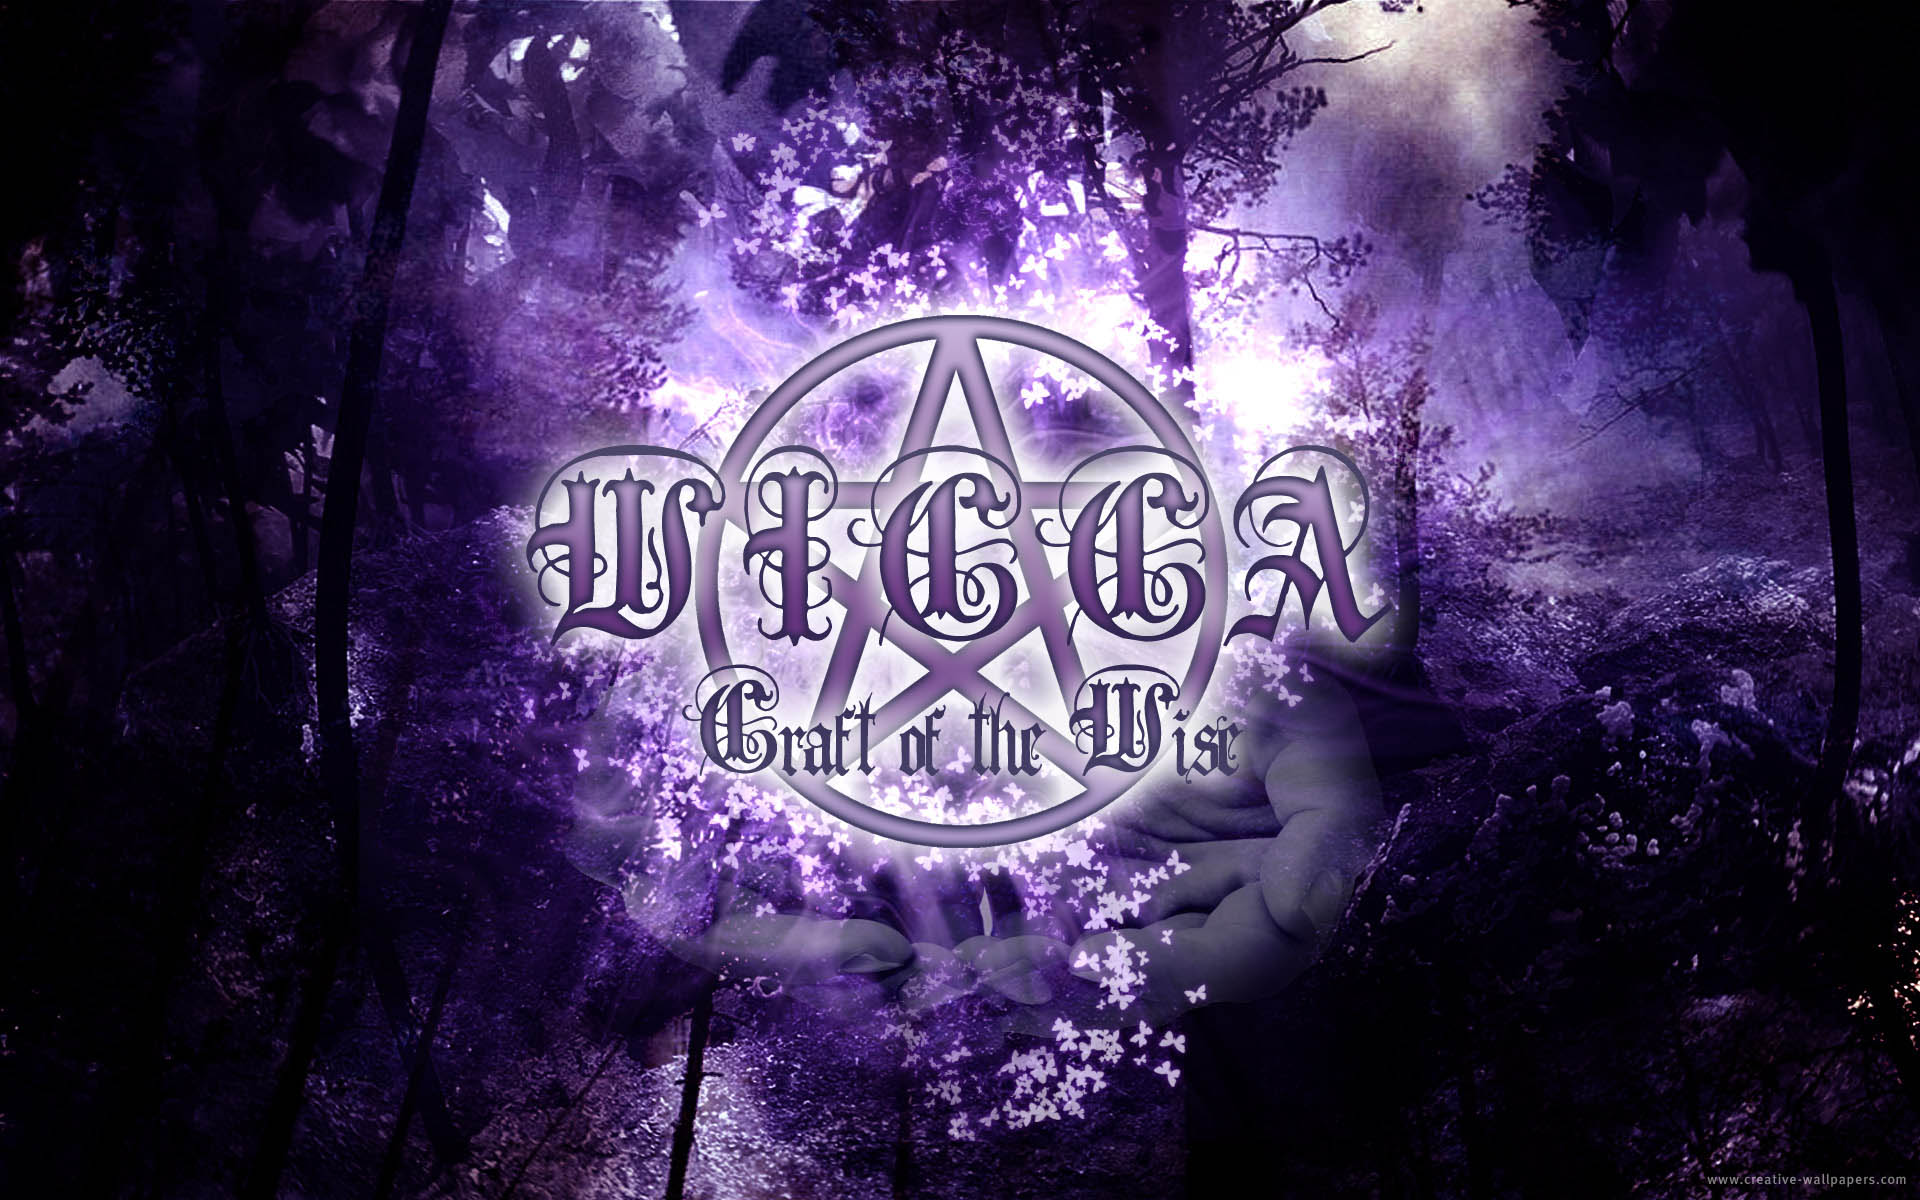 Wicca Desktop Background From Us At Creative Wallpaper